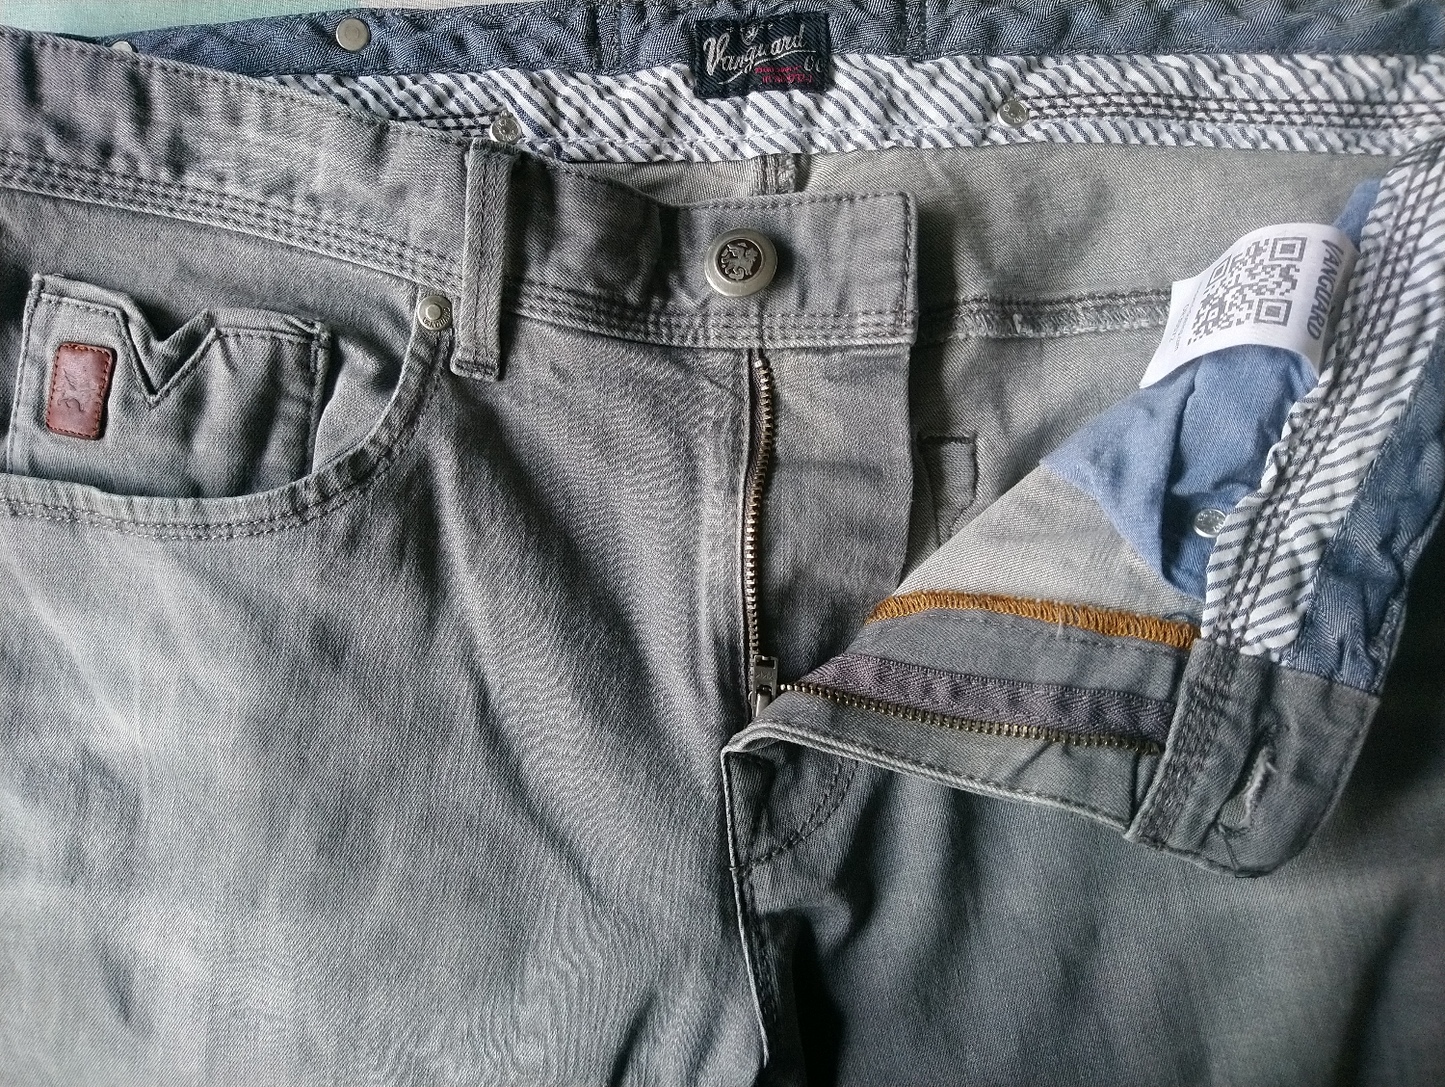 Vanguard jeans. Gray colored. Size W33 - L26. (shortened)